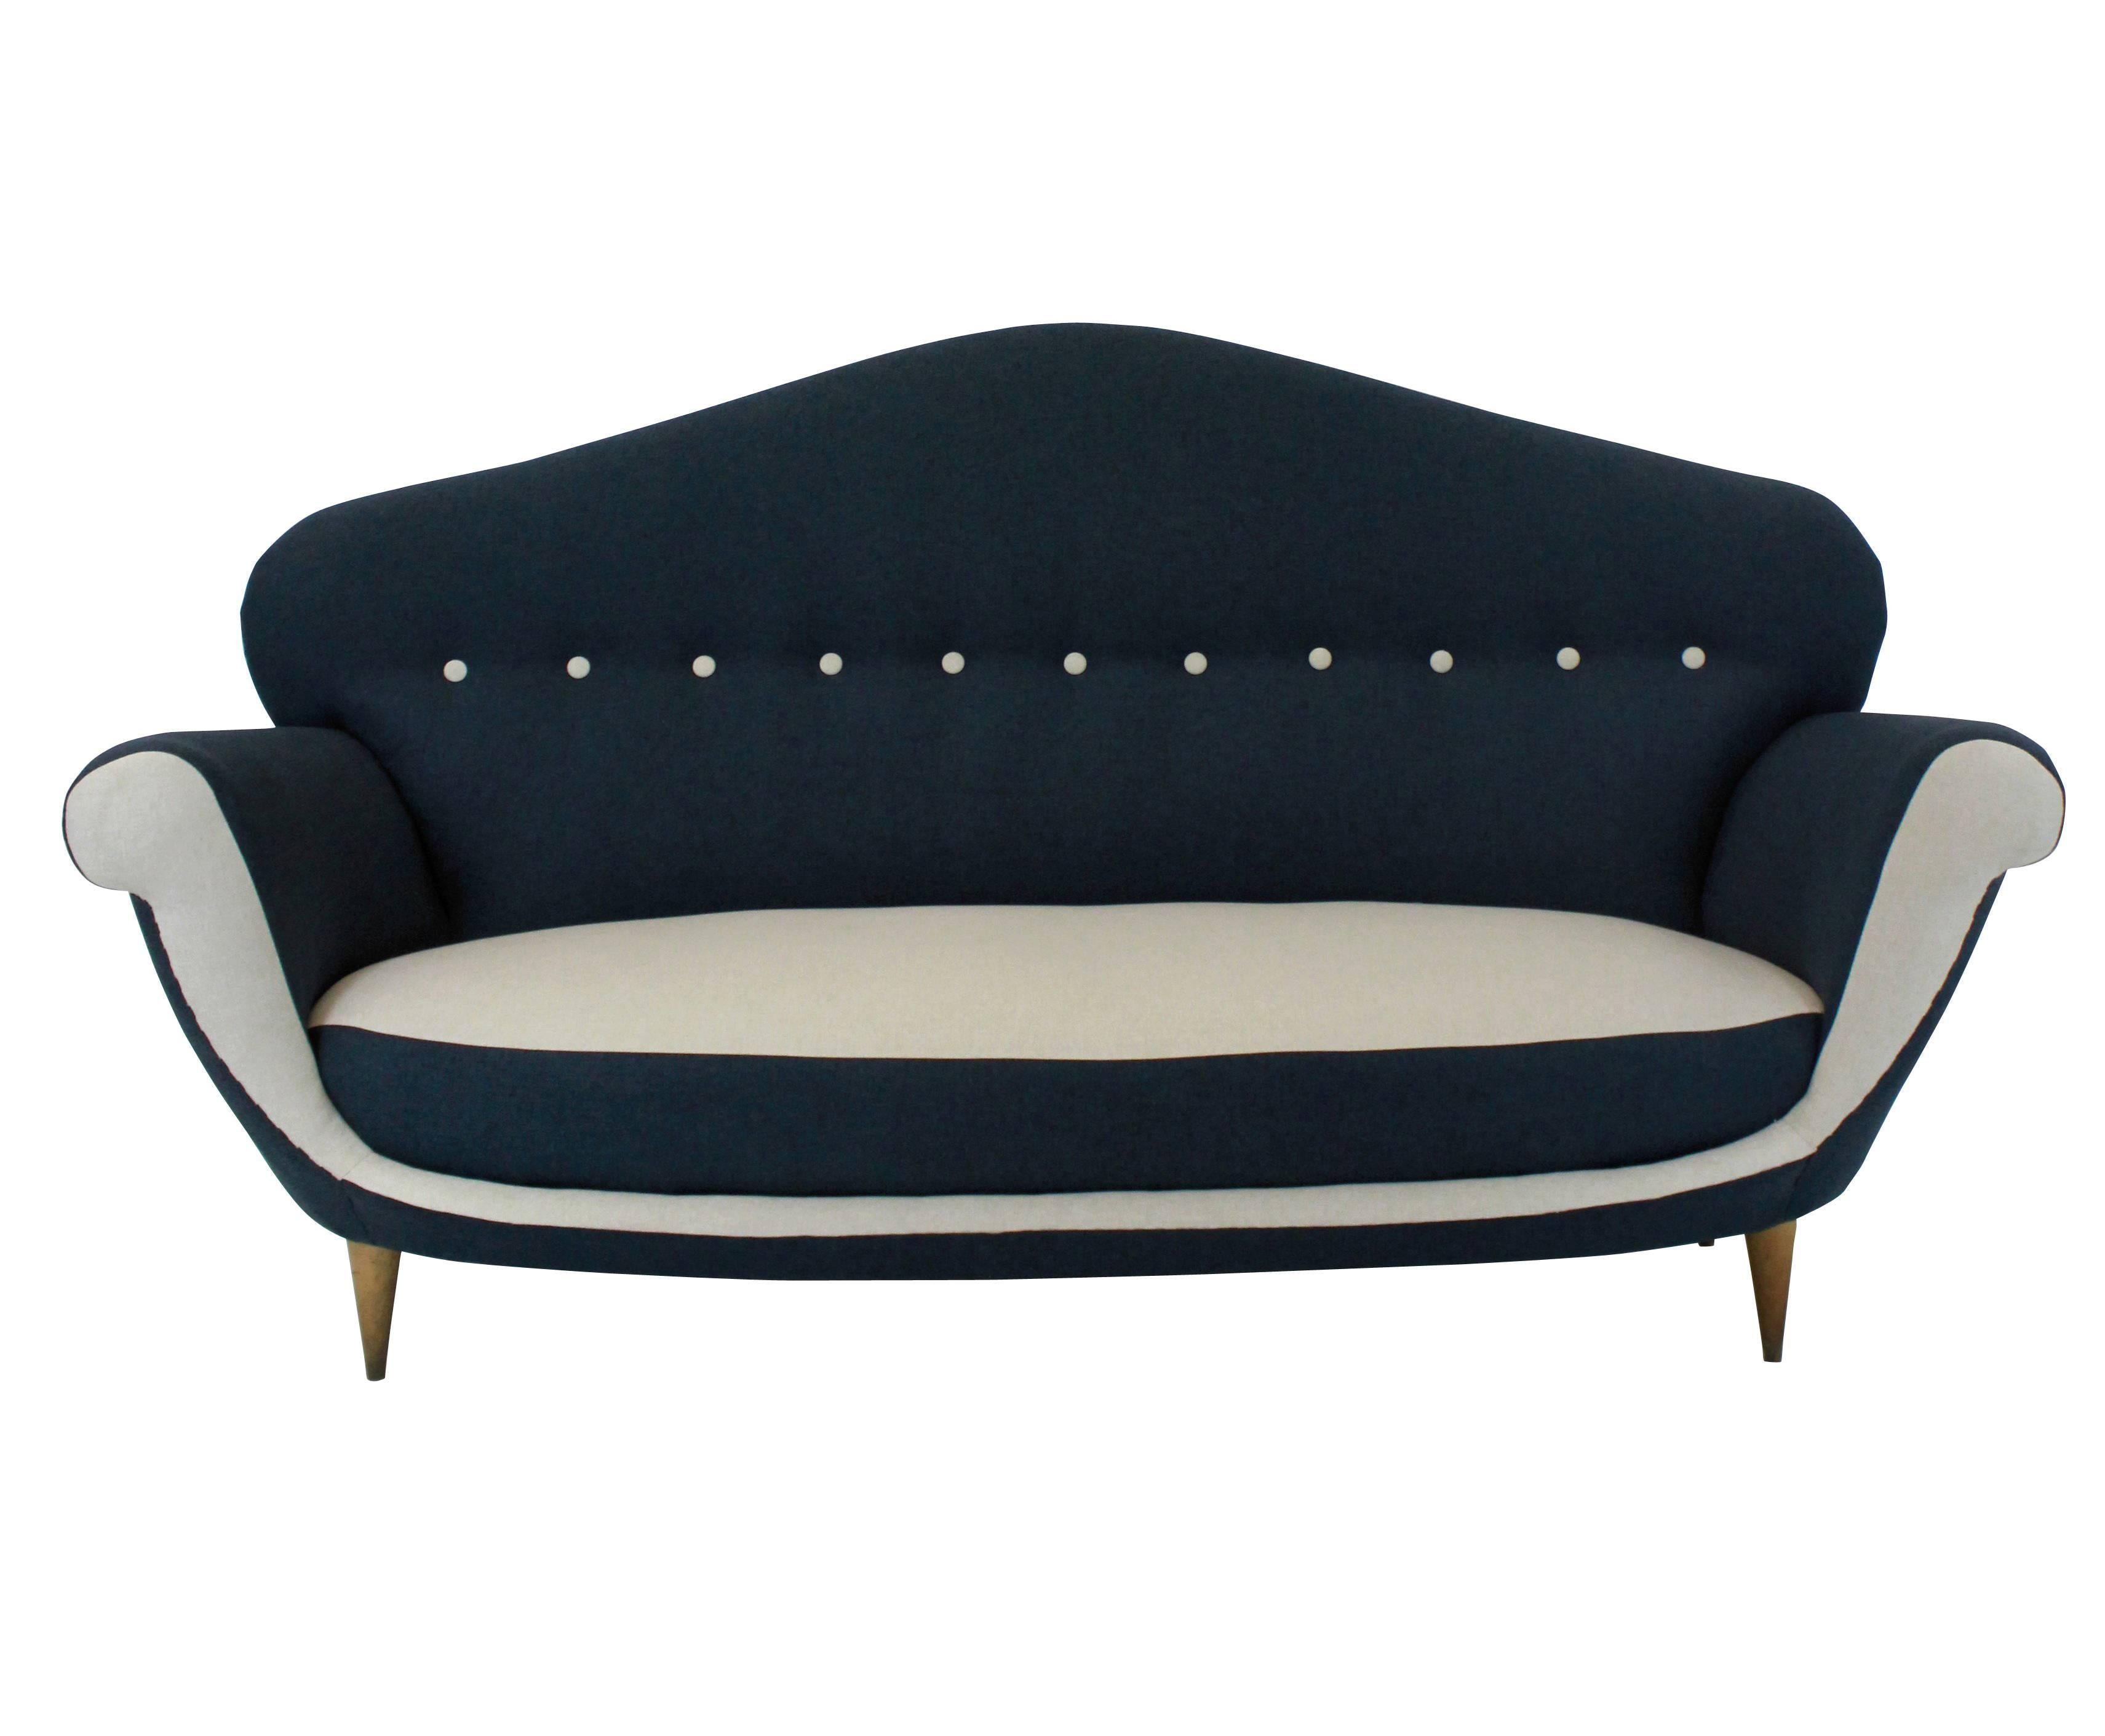 A large Italian sculptural settee of interesting design. Newly upholstered.